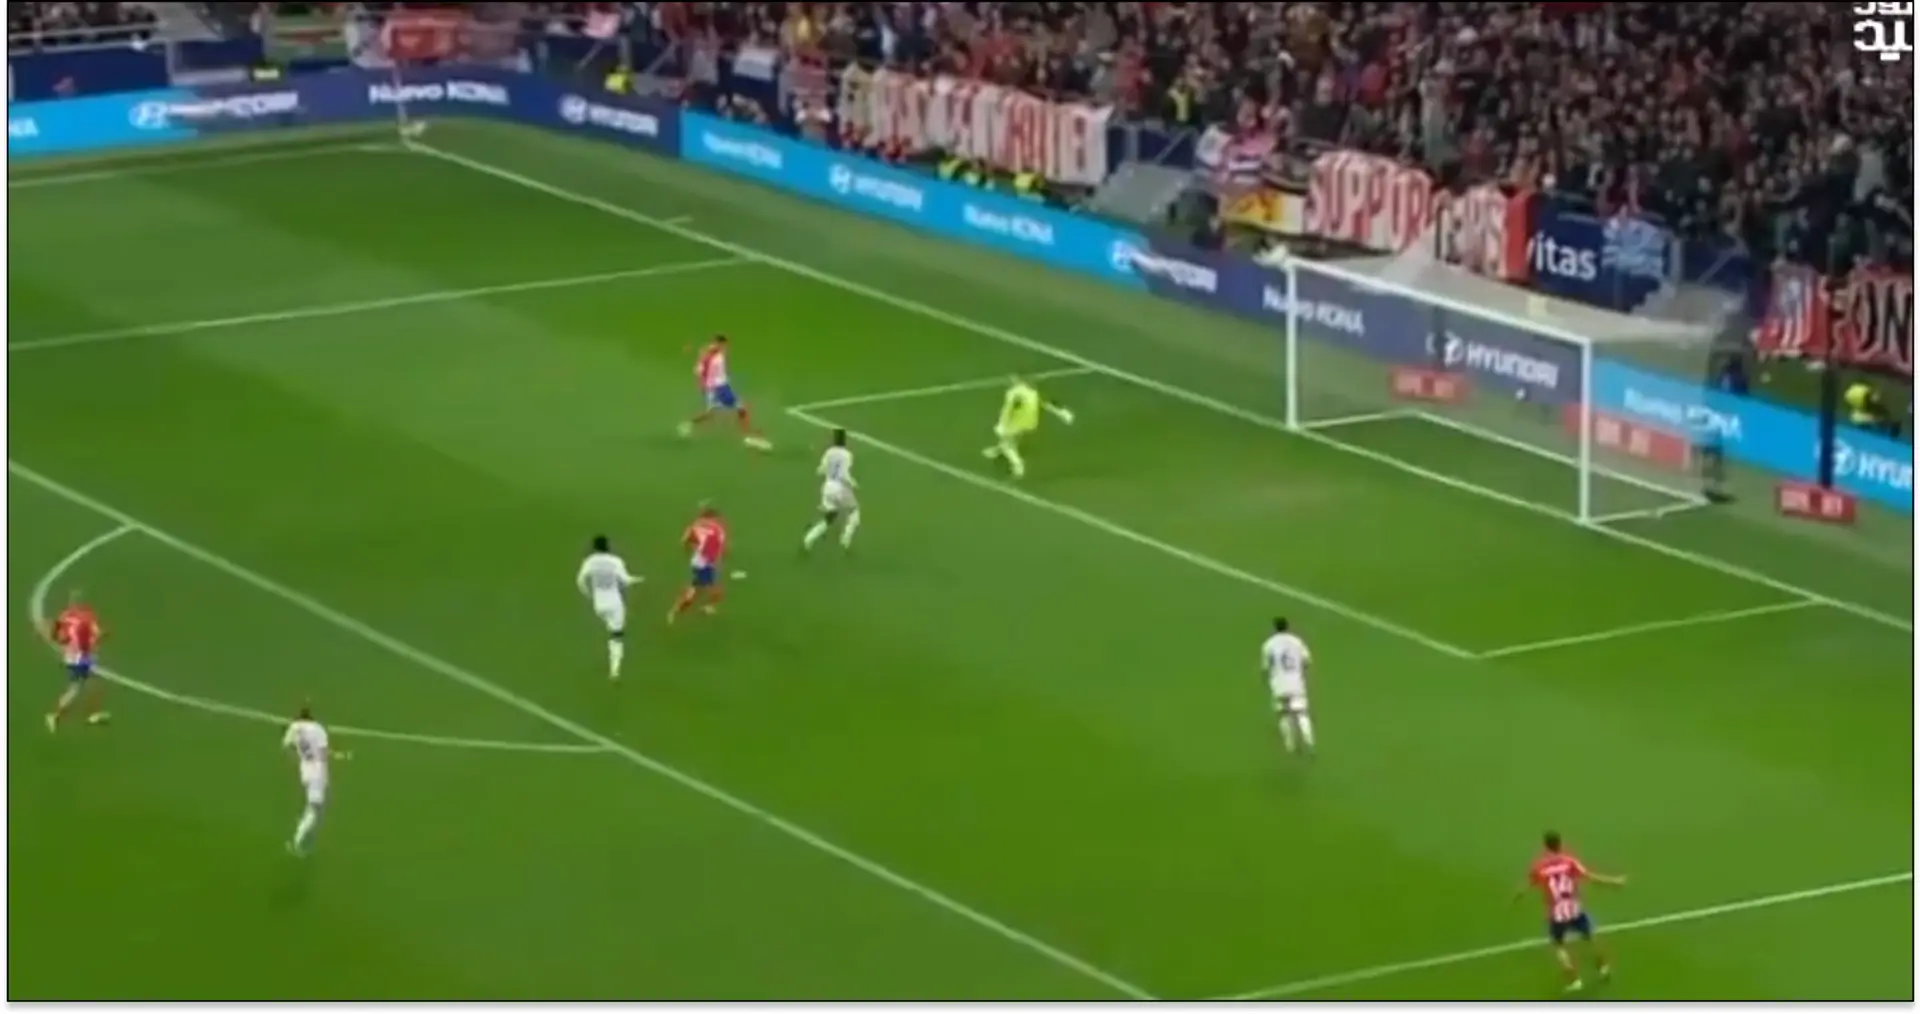 Lunin makes world-class save on Griezmann — Madrid equalise seconds later